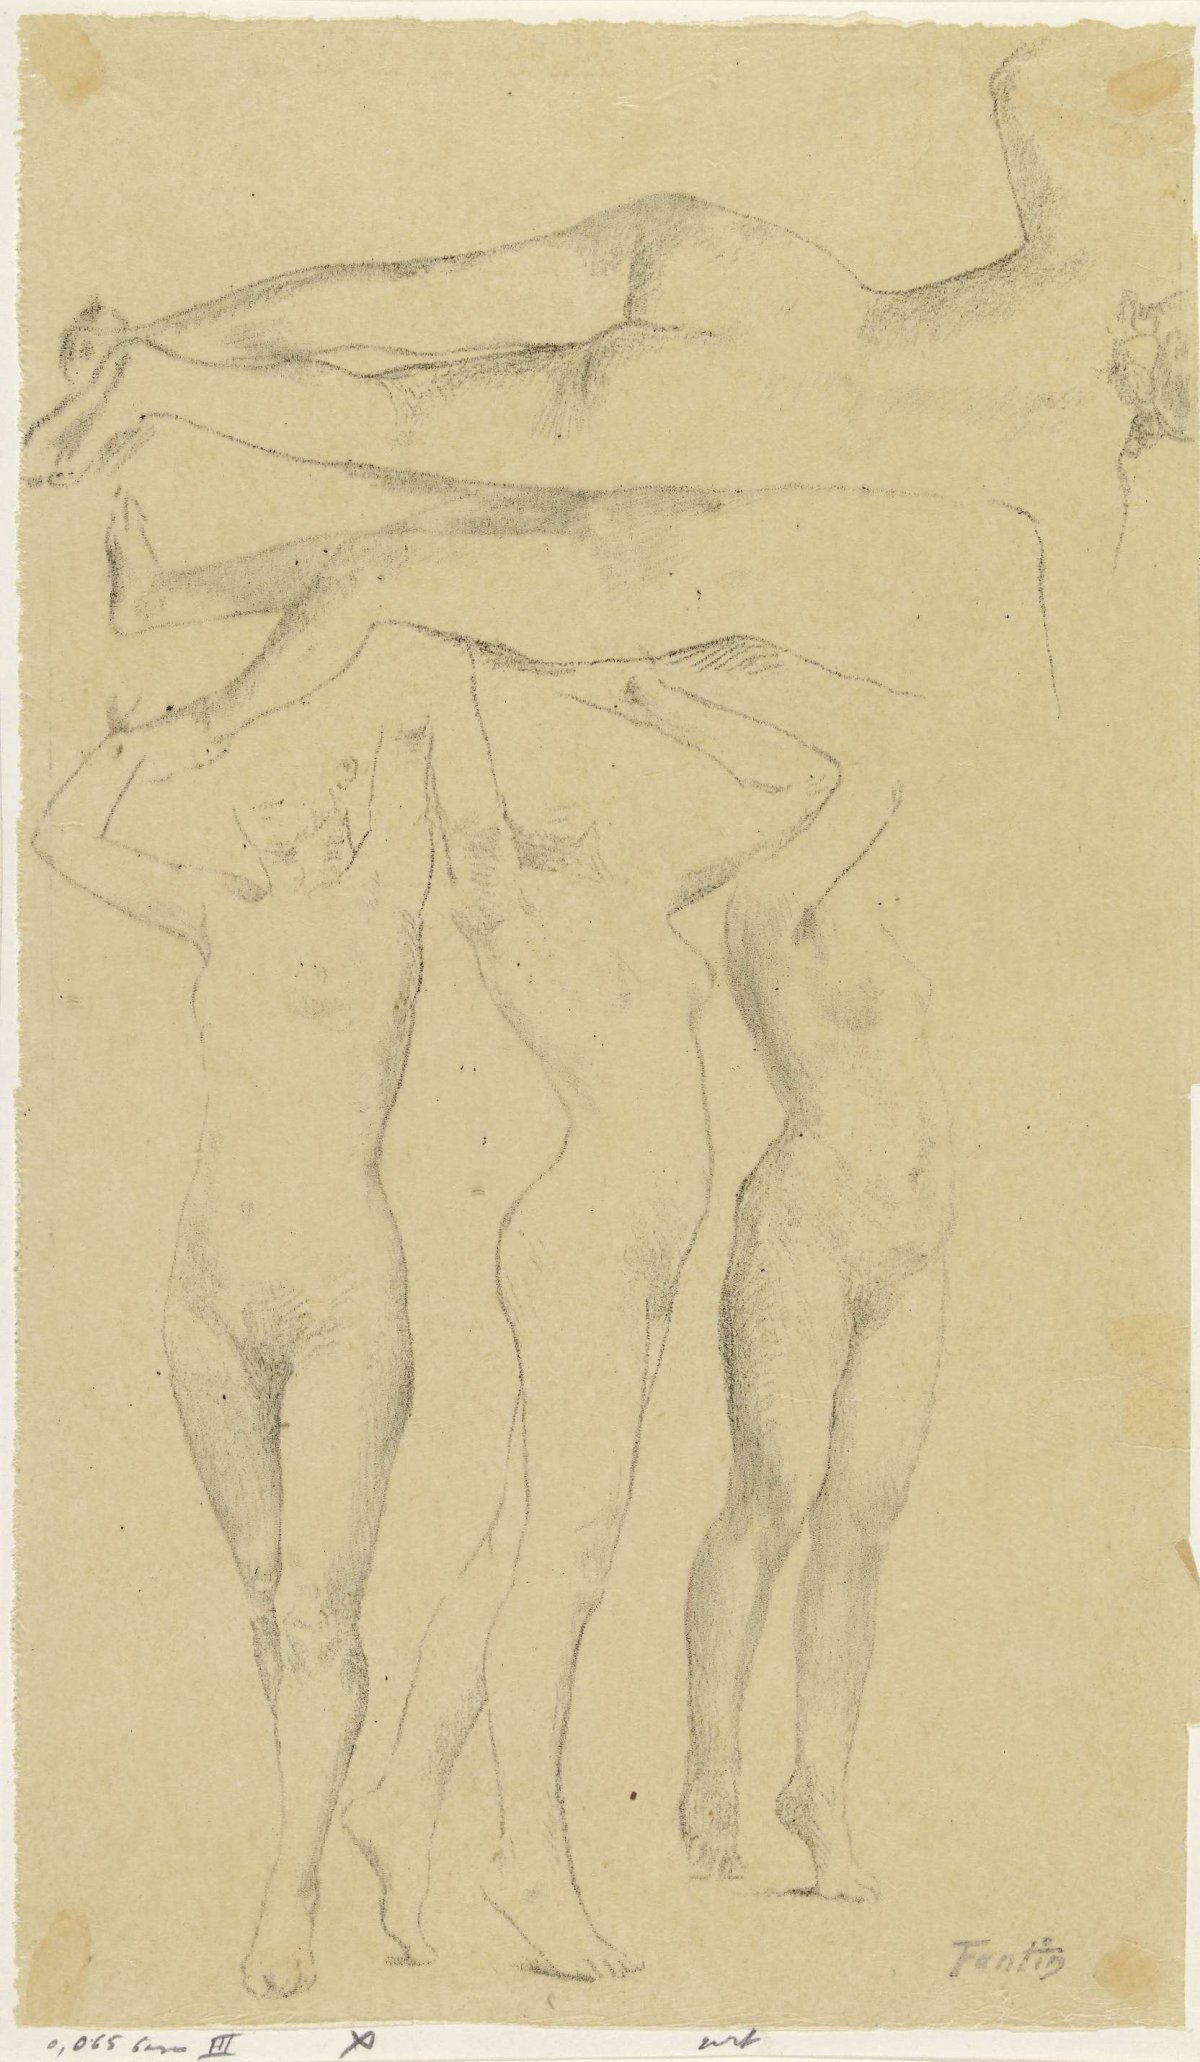 Five nude studies; three with arms raised, the others seen from behind, Henri Fantin-Latour, 1846 - 1904